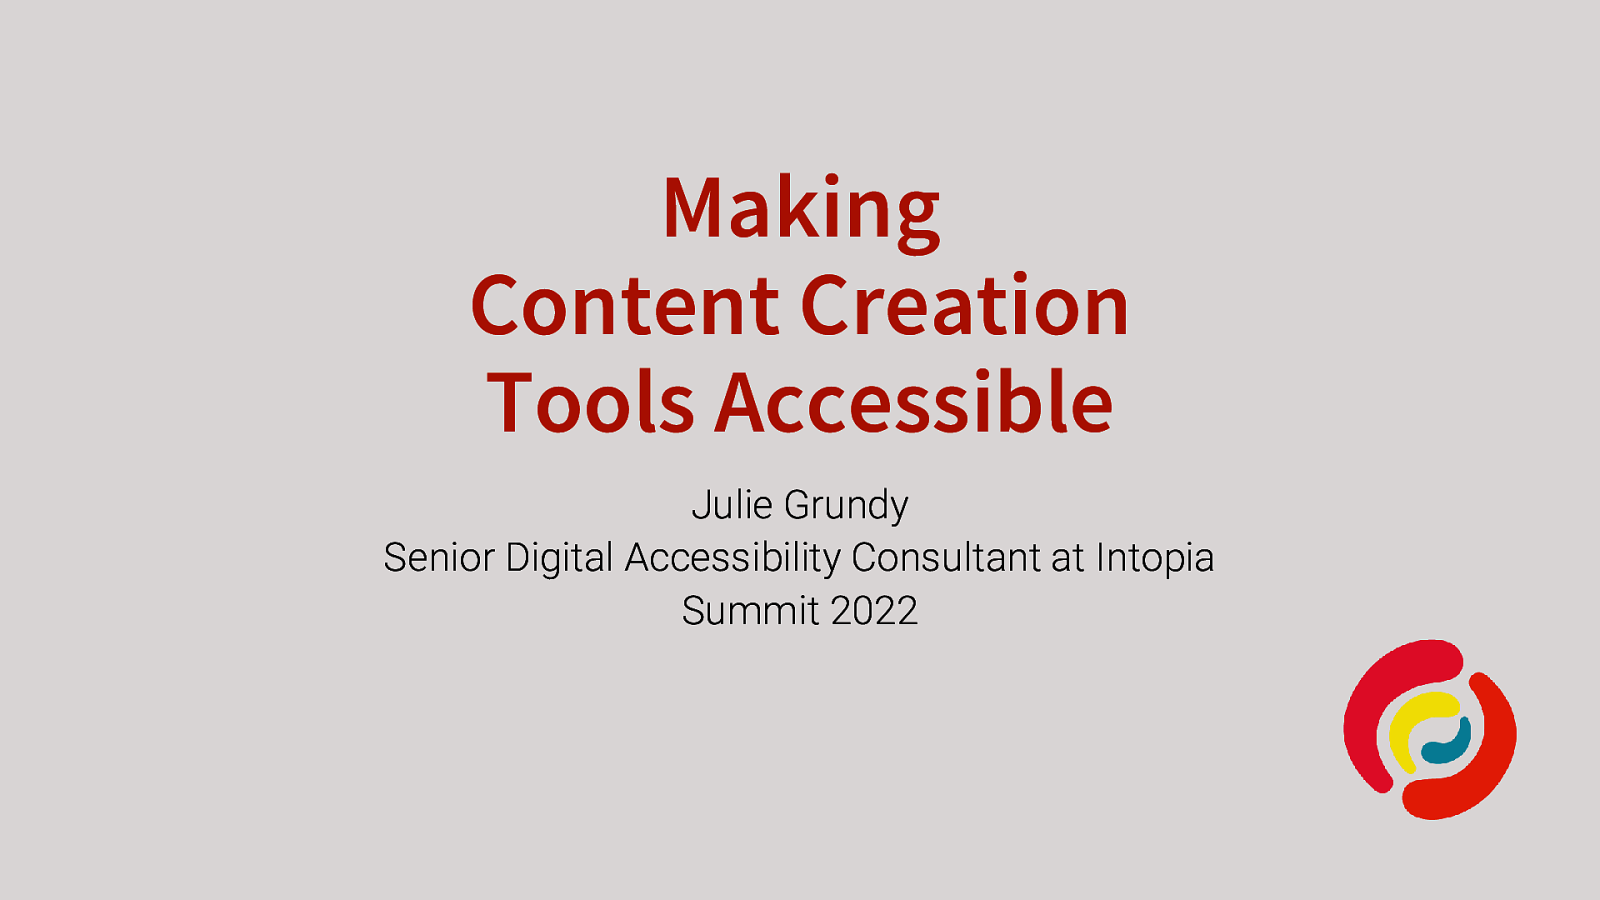 Making Content Creation Tools Accessible